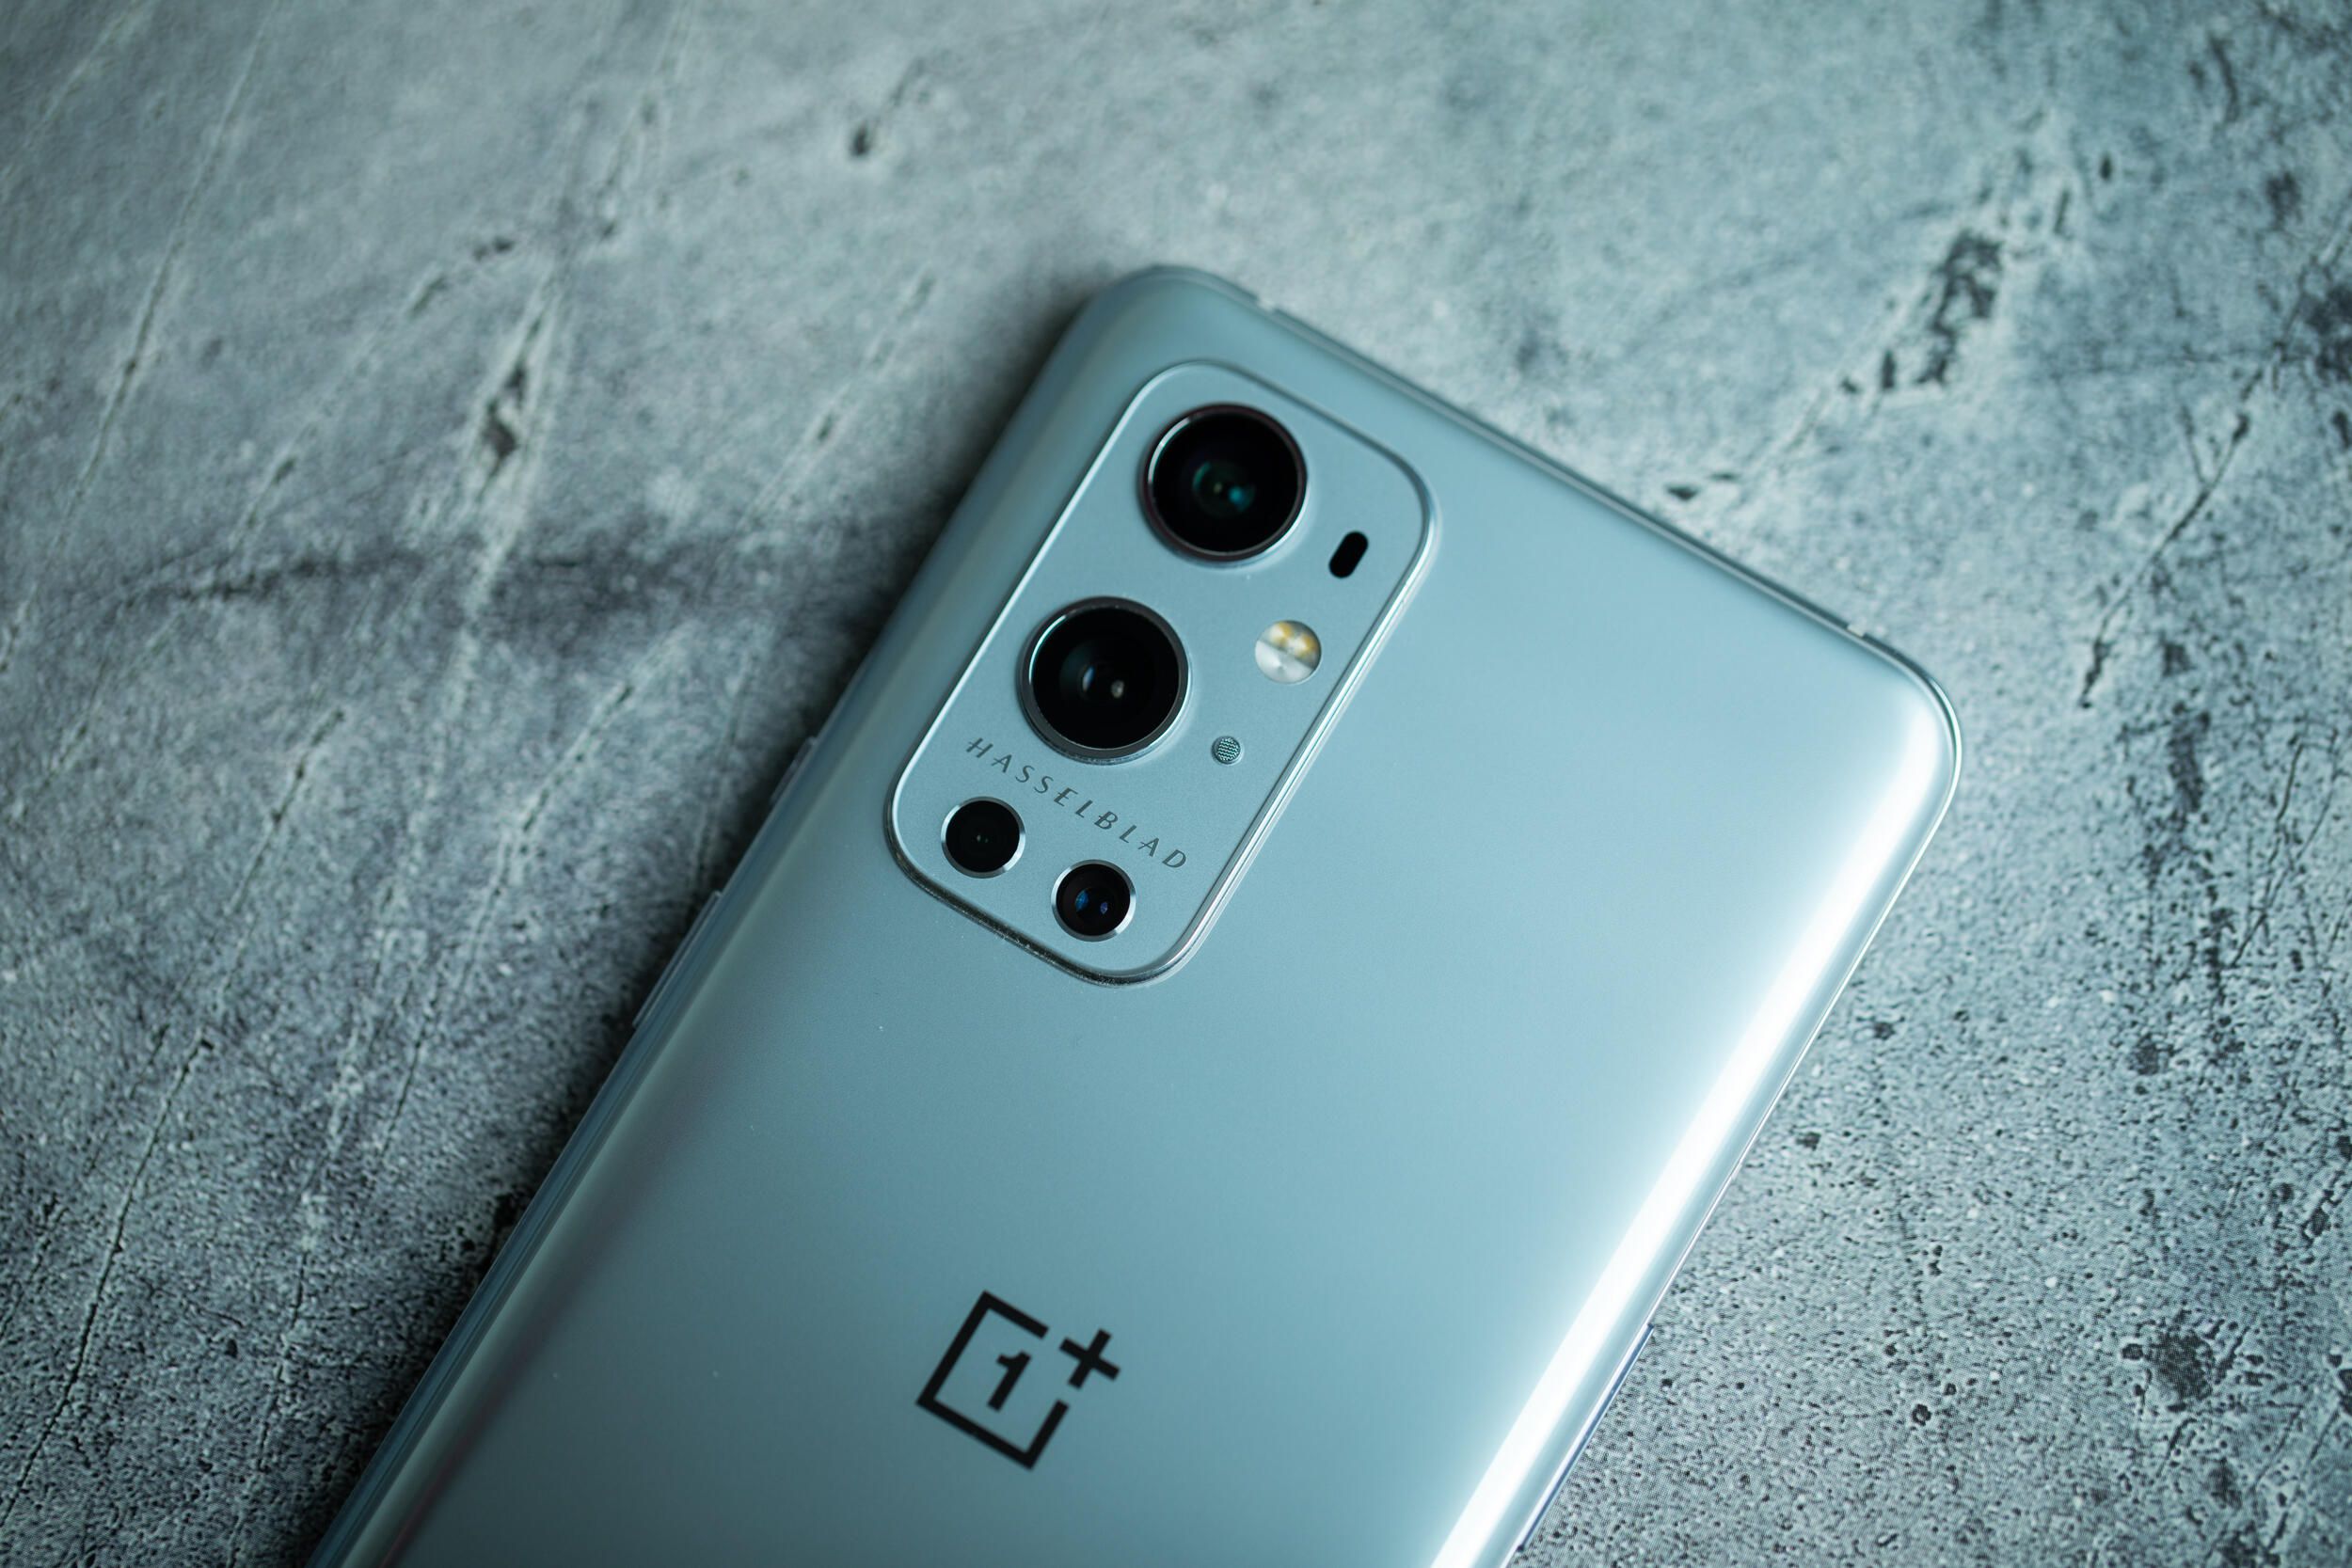 Rumor: OnePlus 10 Pro will get a periscopic camera with 5x optical zoom support